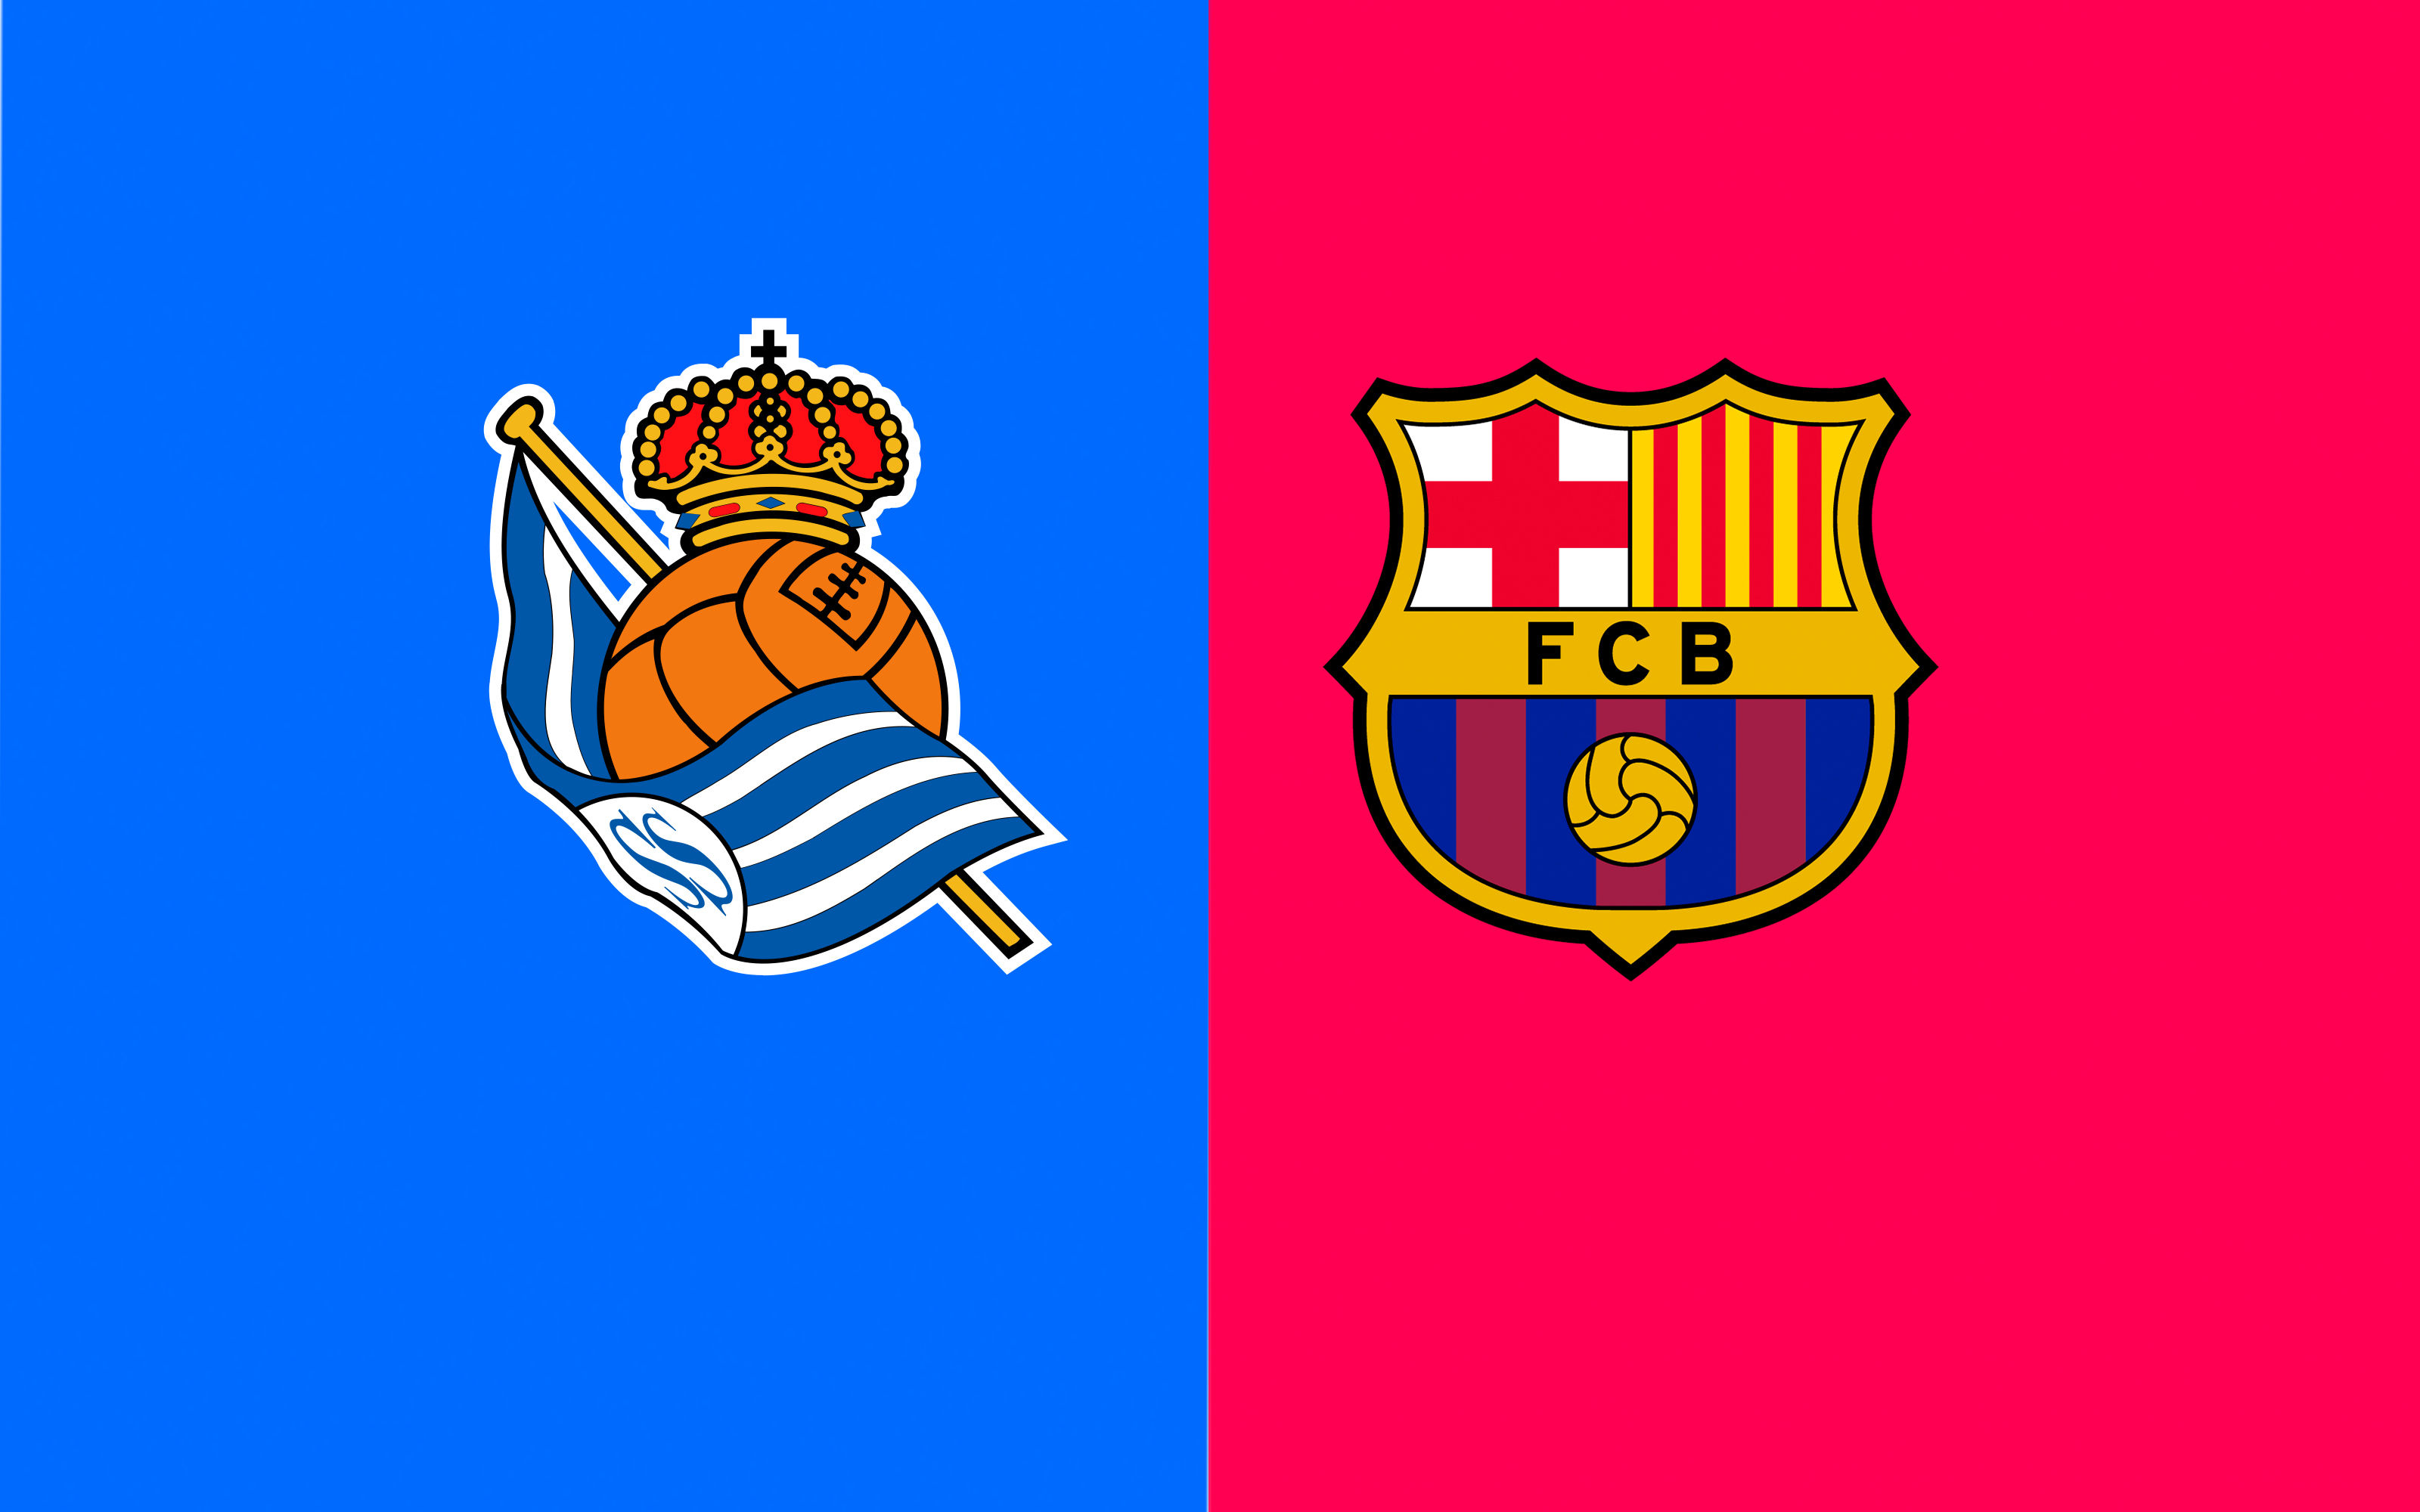 When and where to watch Real Sociedad v FC Barcelona